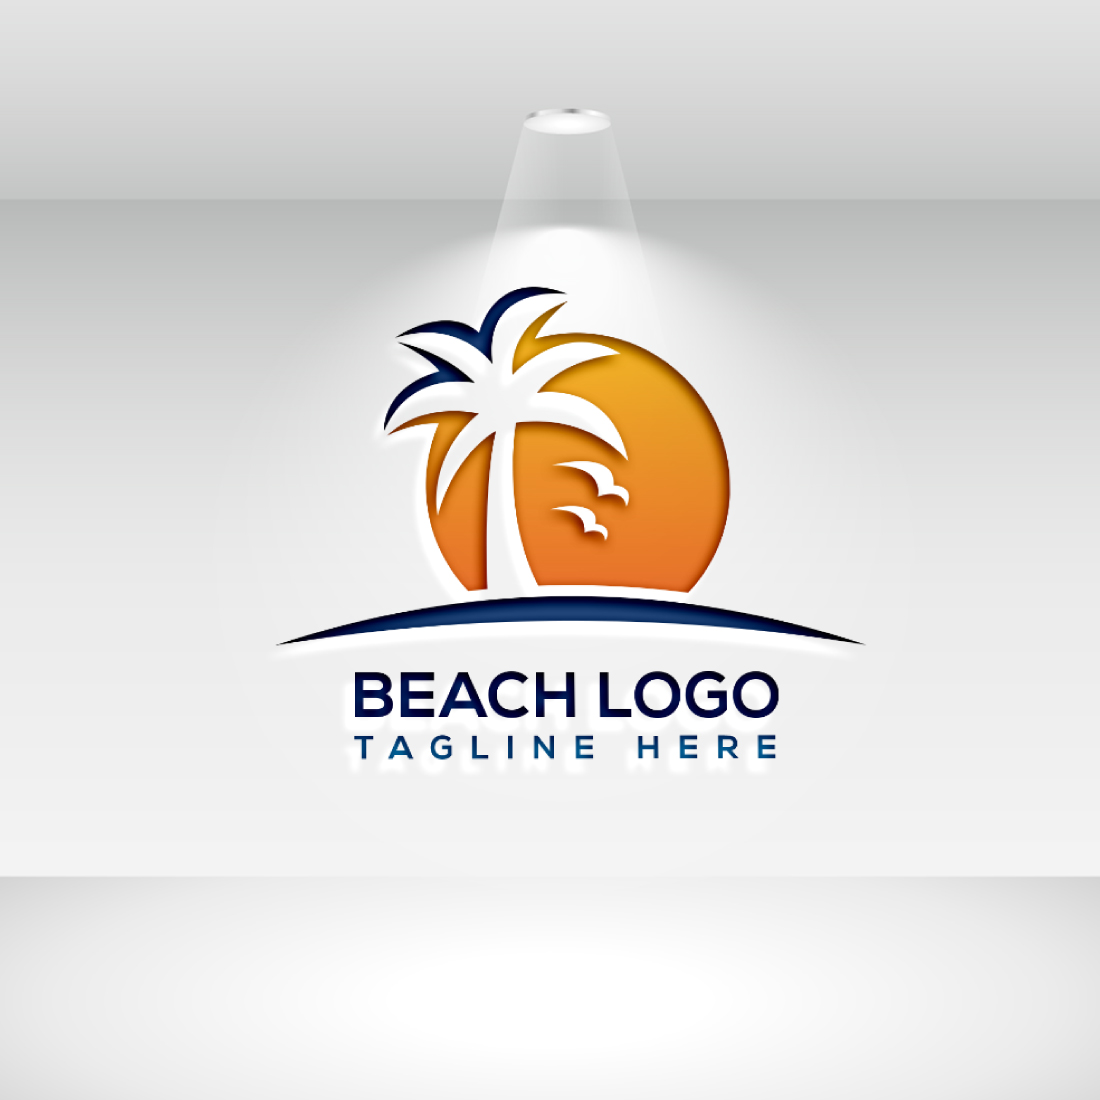 Simple Tropical Beach Logo Template Illustration cover image.